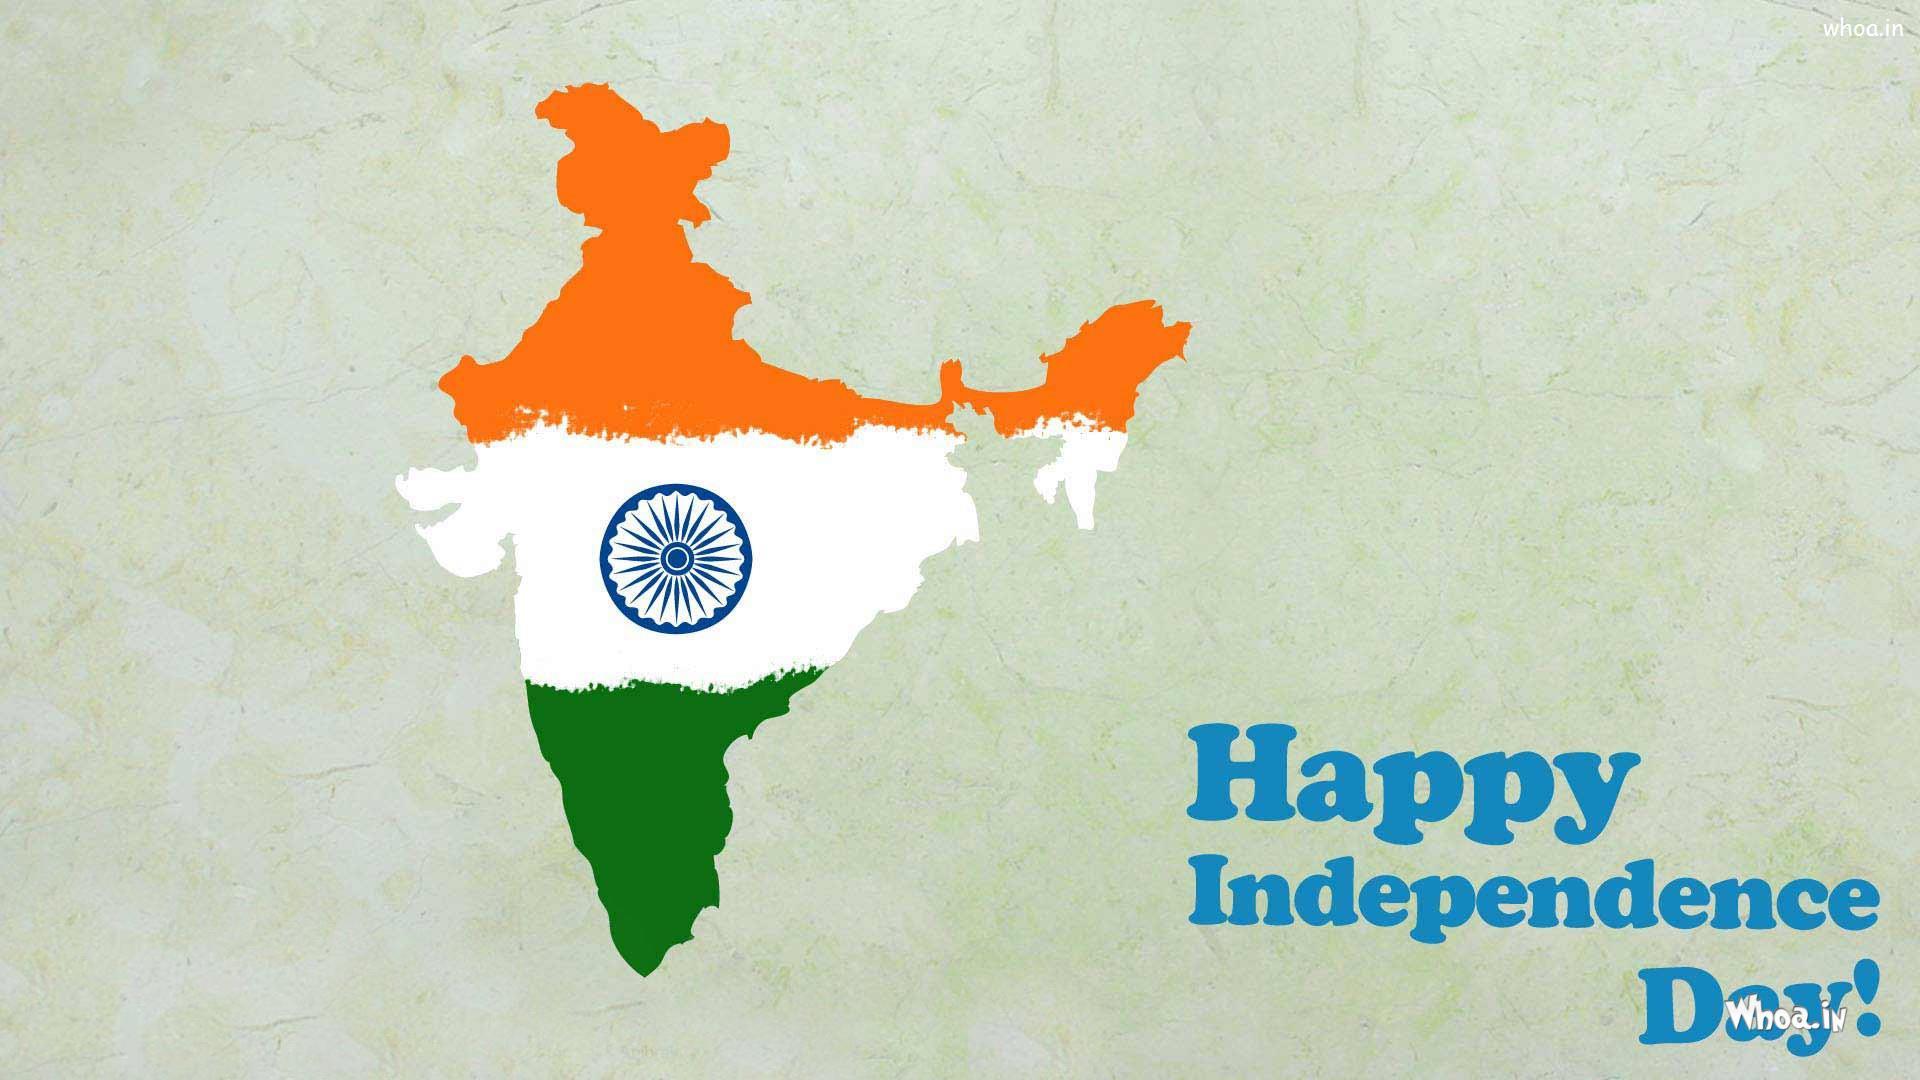 India Map Wallpaper Free India Map Background